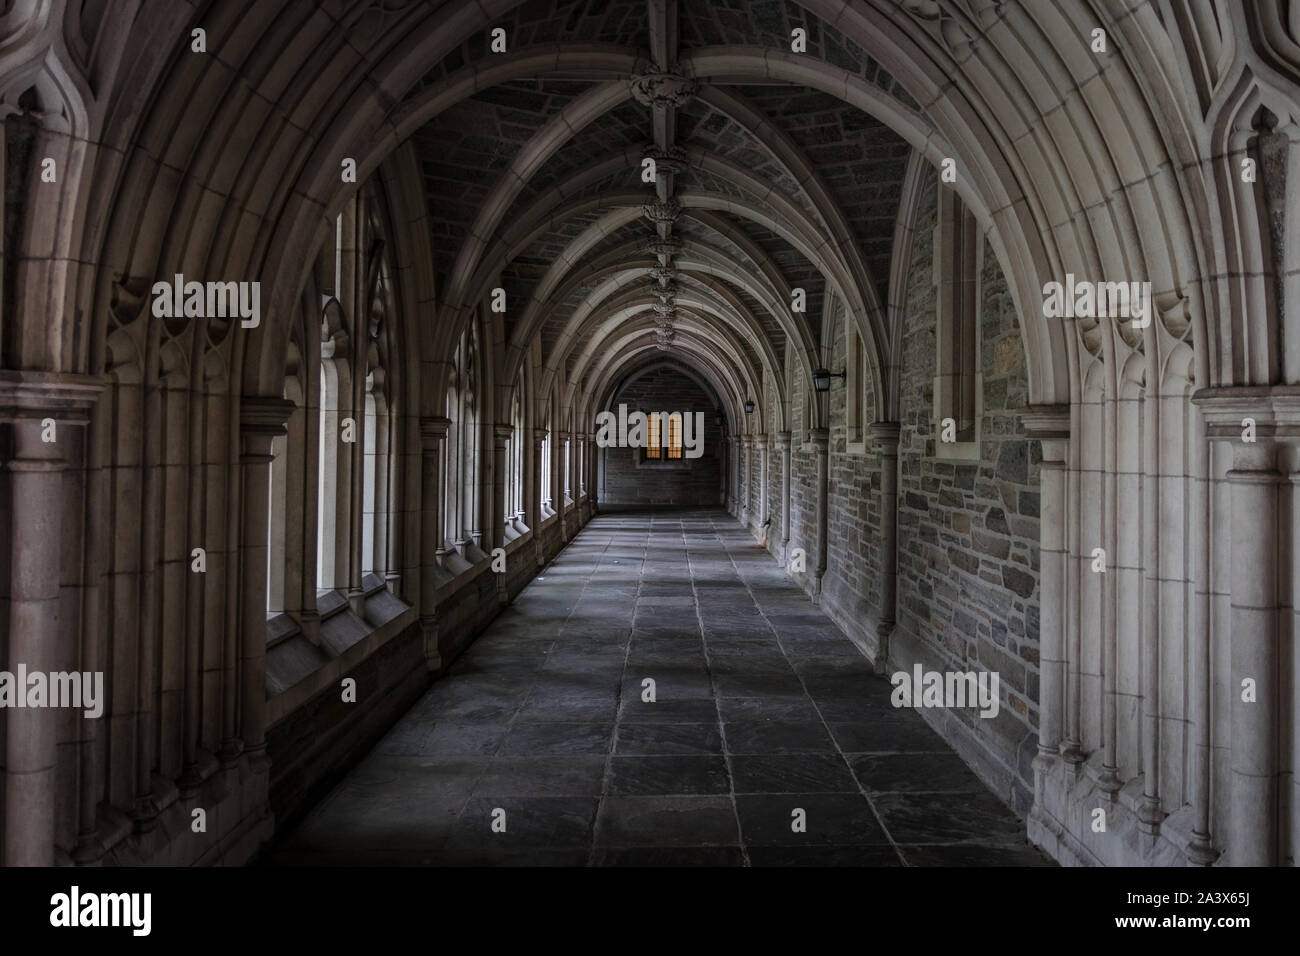 Cloister arches on campus of Princeton University Stock Photo